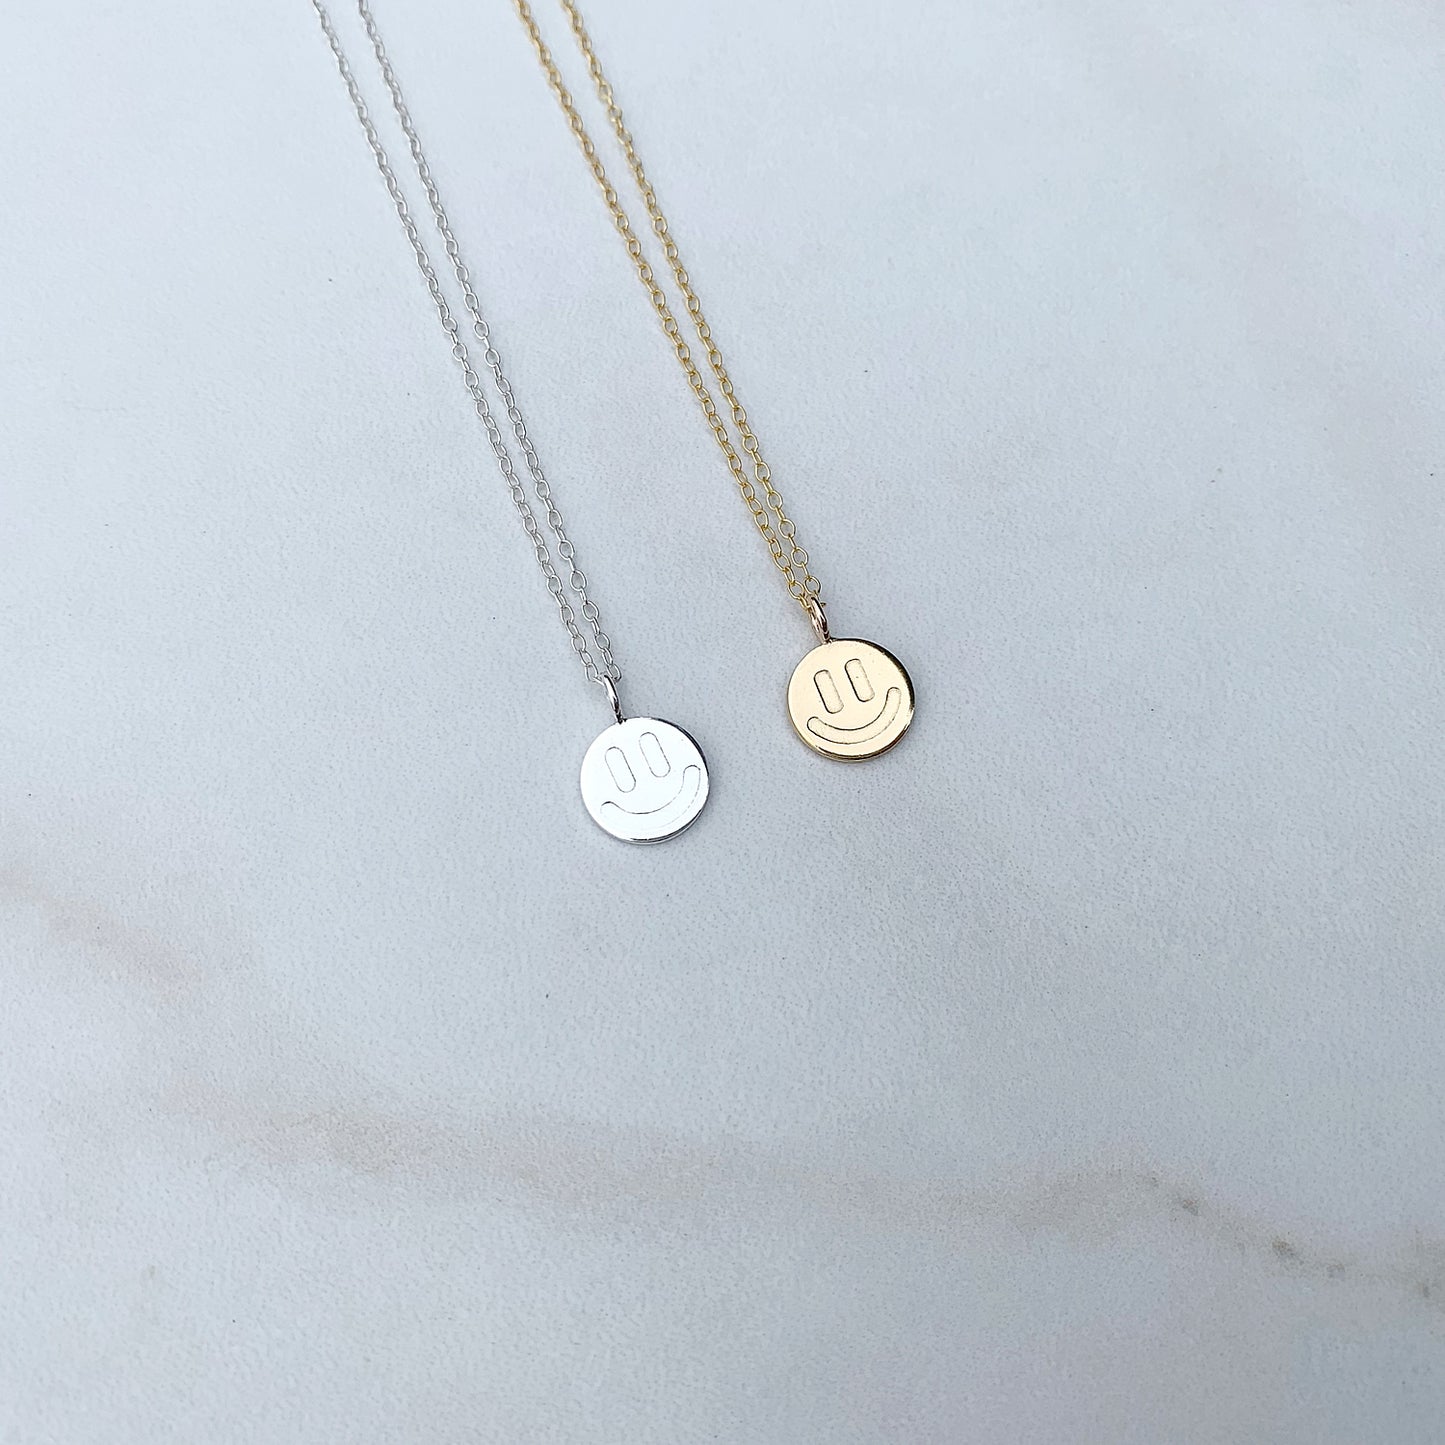 one sterling silver smiley face necklace next to a gold smiley face neckalce on a white background